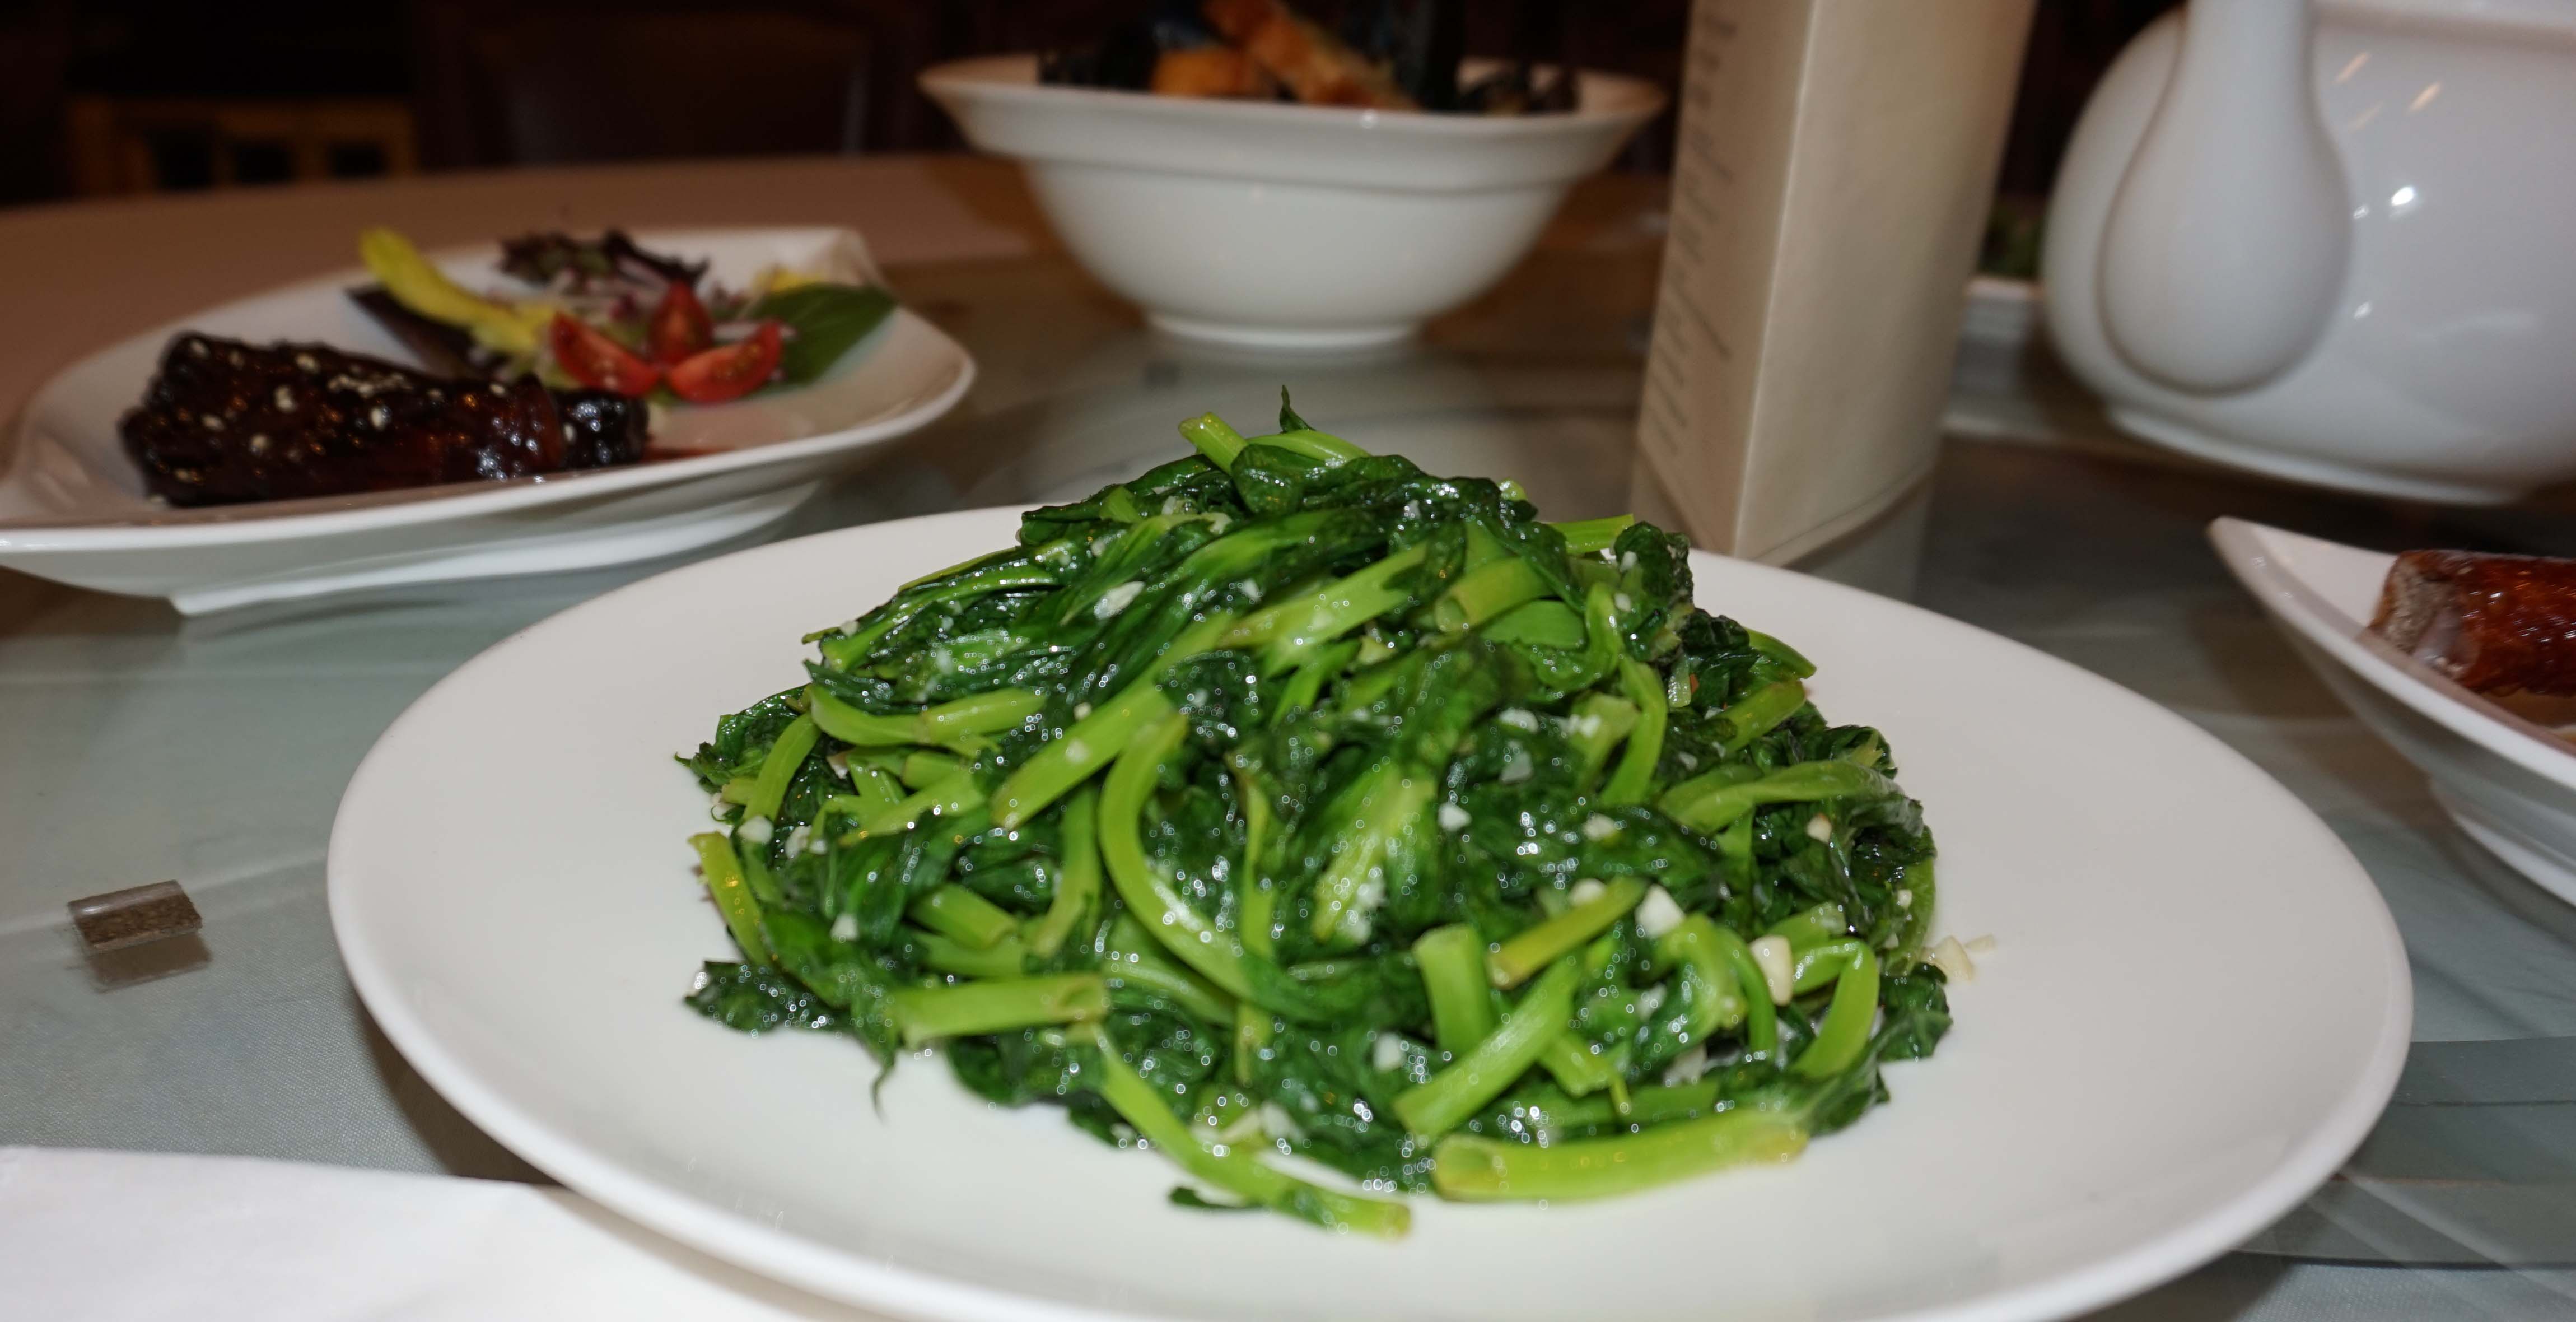 St George Sauteed Snow pea leaves with minced garlic